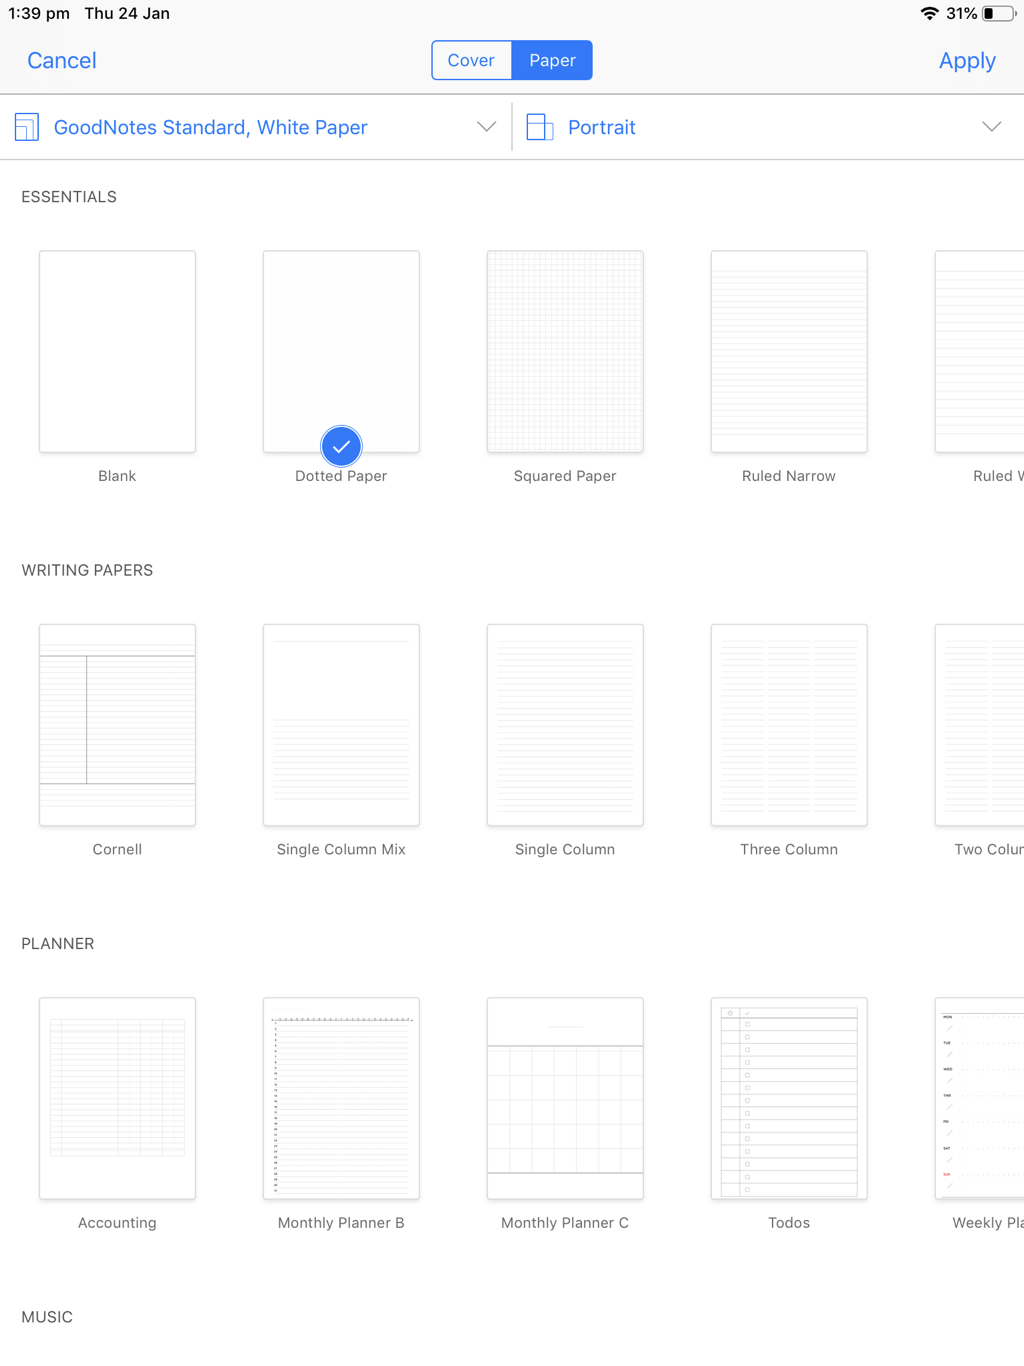 goodnotes template